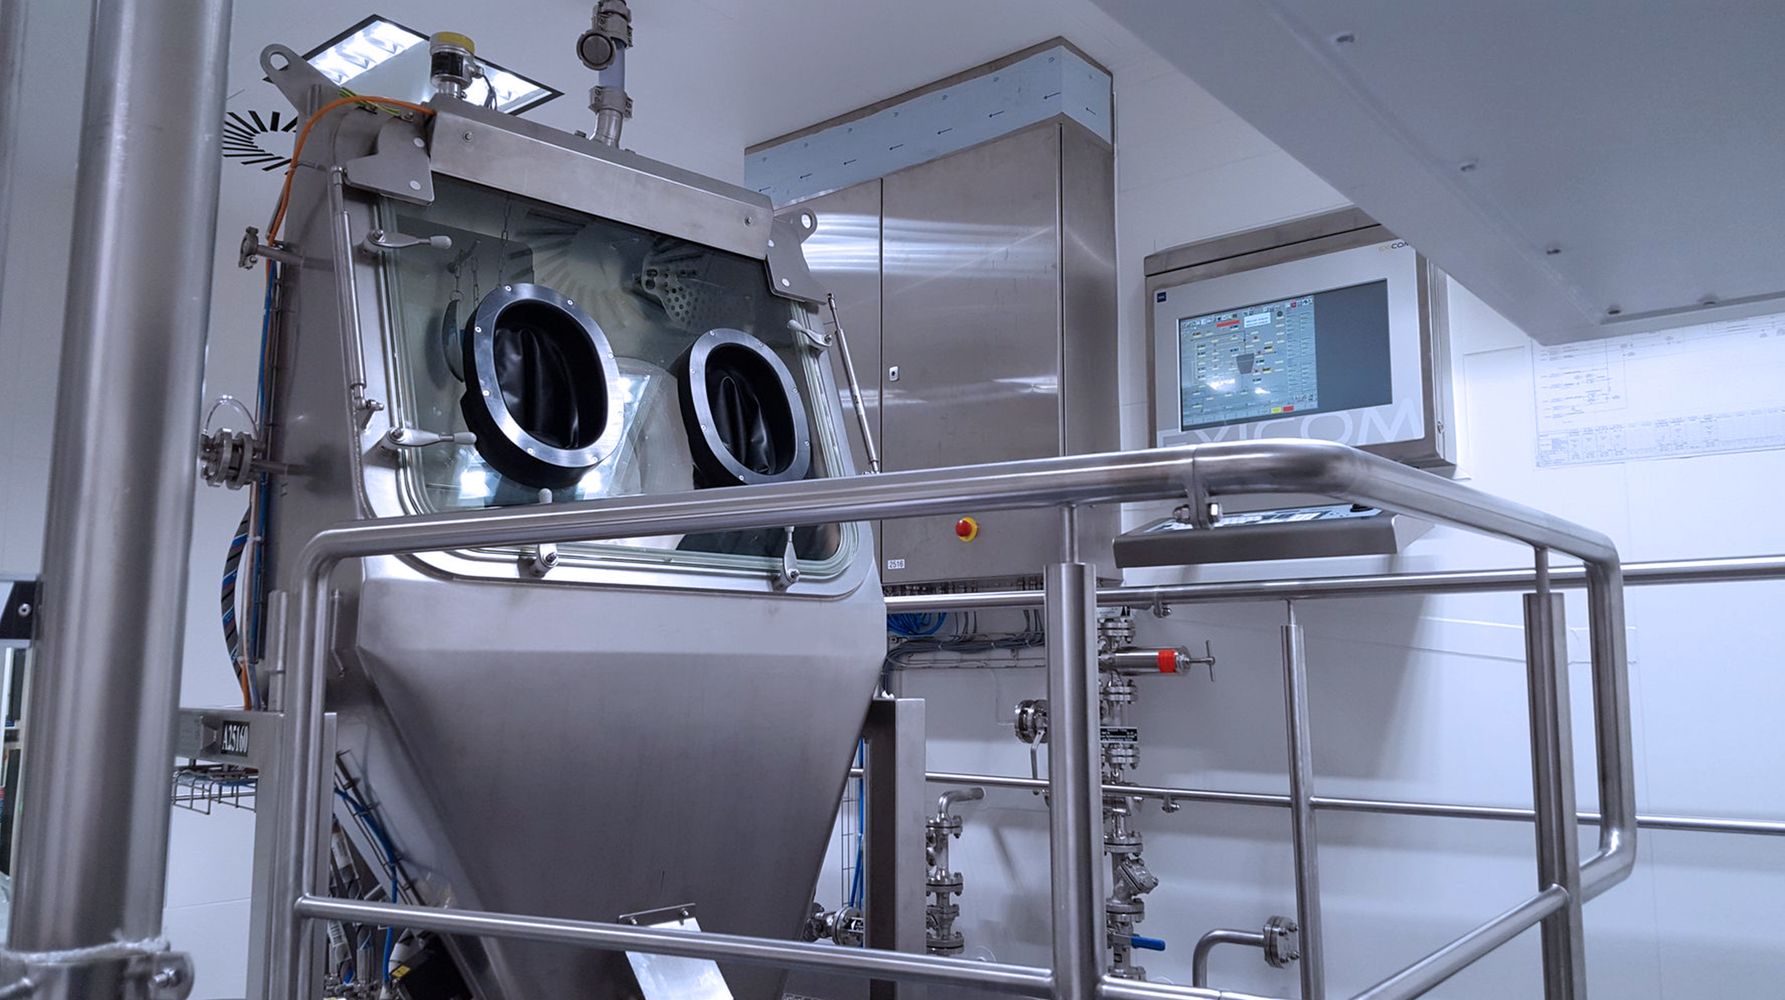 A HECHT Technologie Containment Drum Discharger installed in a cleanroom environment, featuring glove ports for secure handling, a control panel display, and a network of pipes and valves, all within a stainless steel frame.